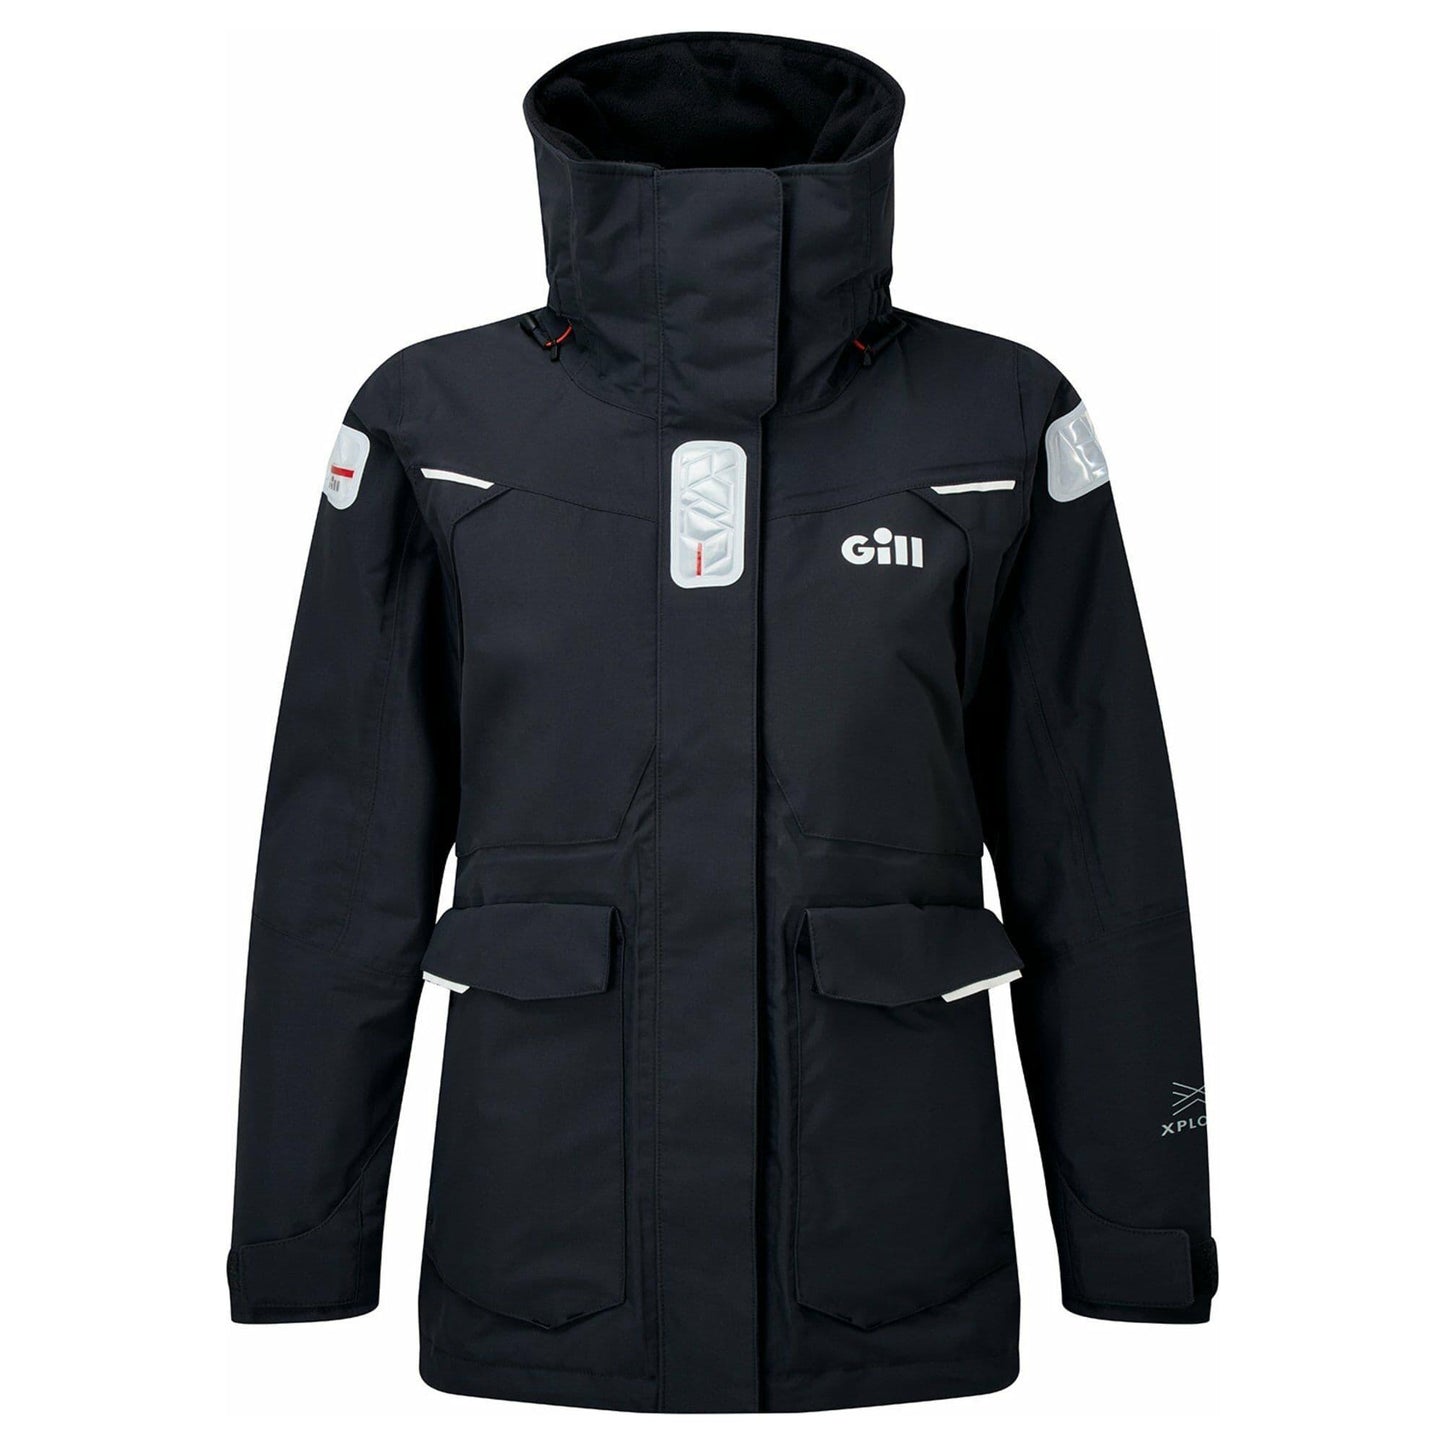 Gill OS25JW Graphite Women's Offshore Jacket